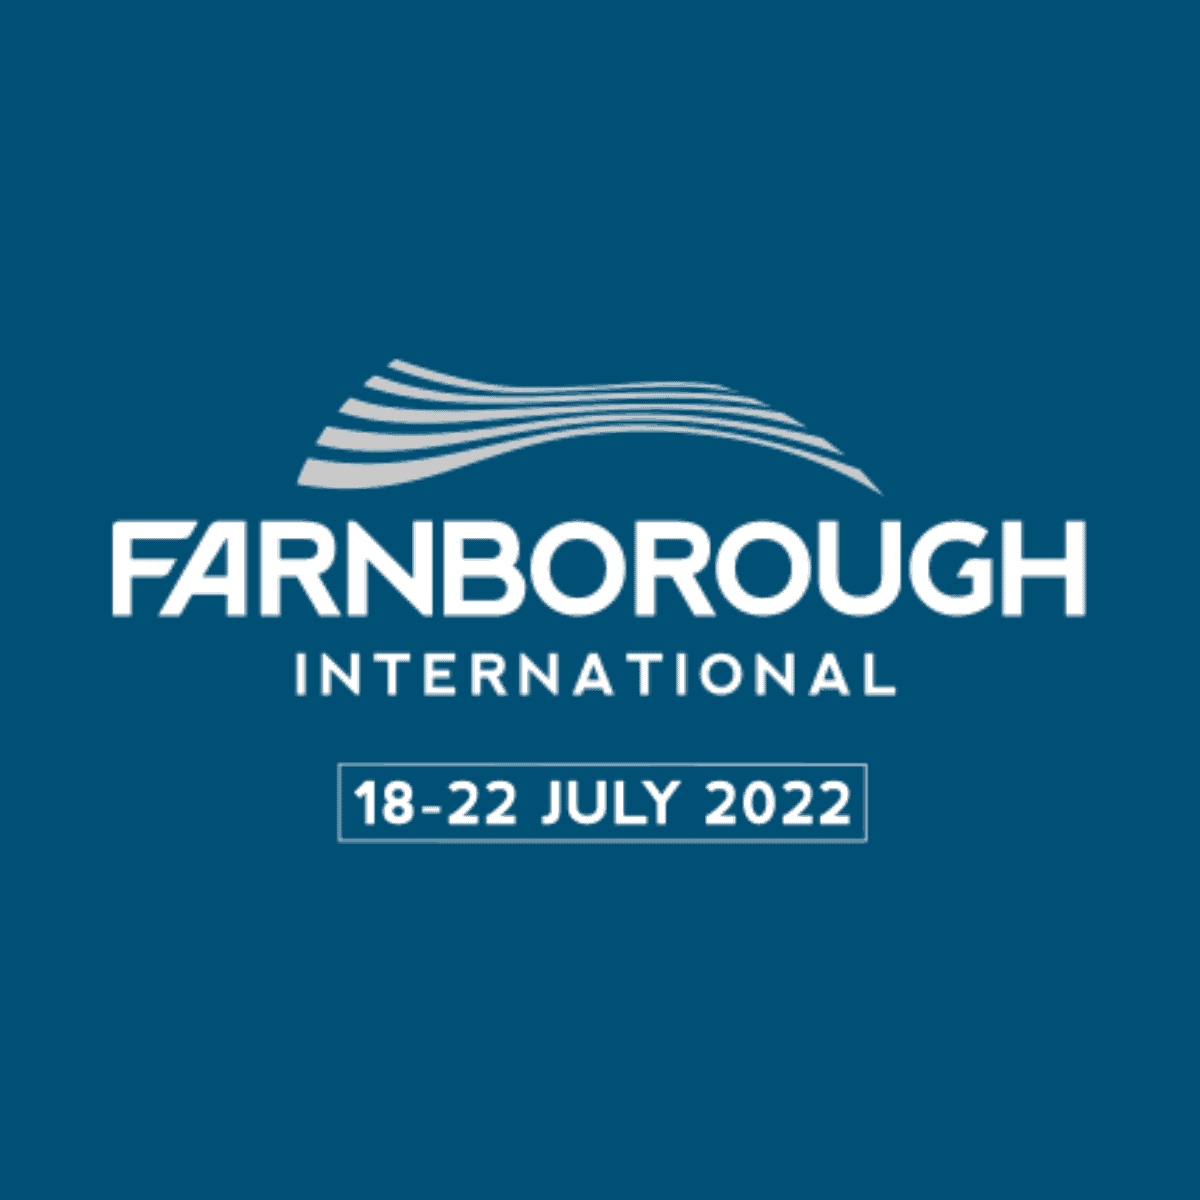 We participate at farnborough international airshow 2022to present our fast paint repair solution